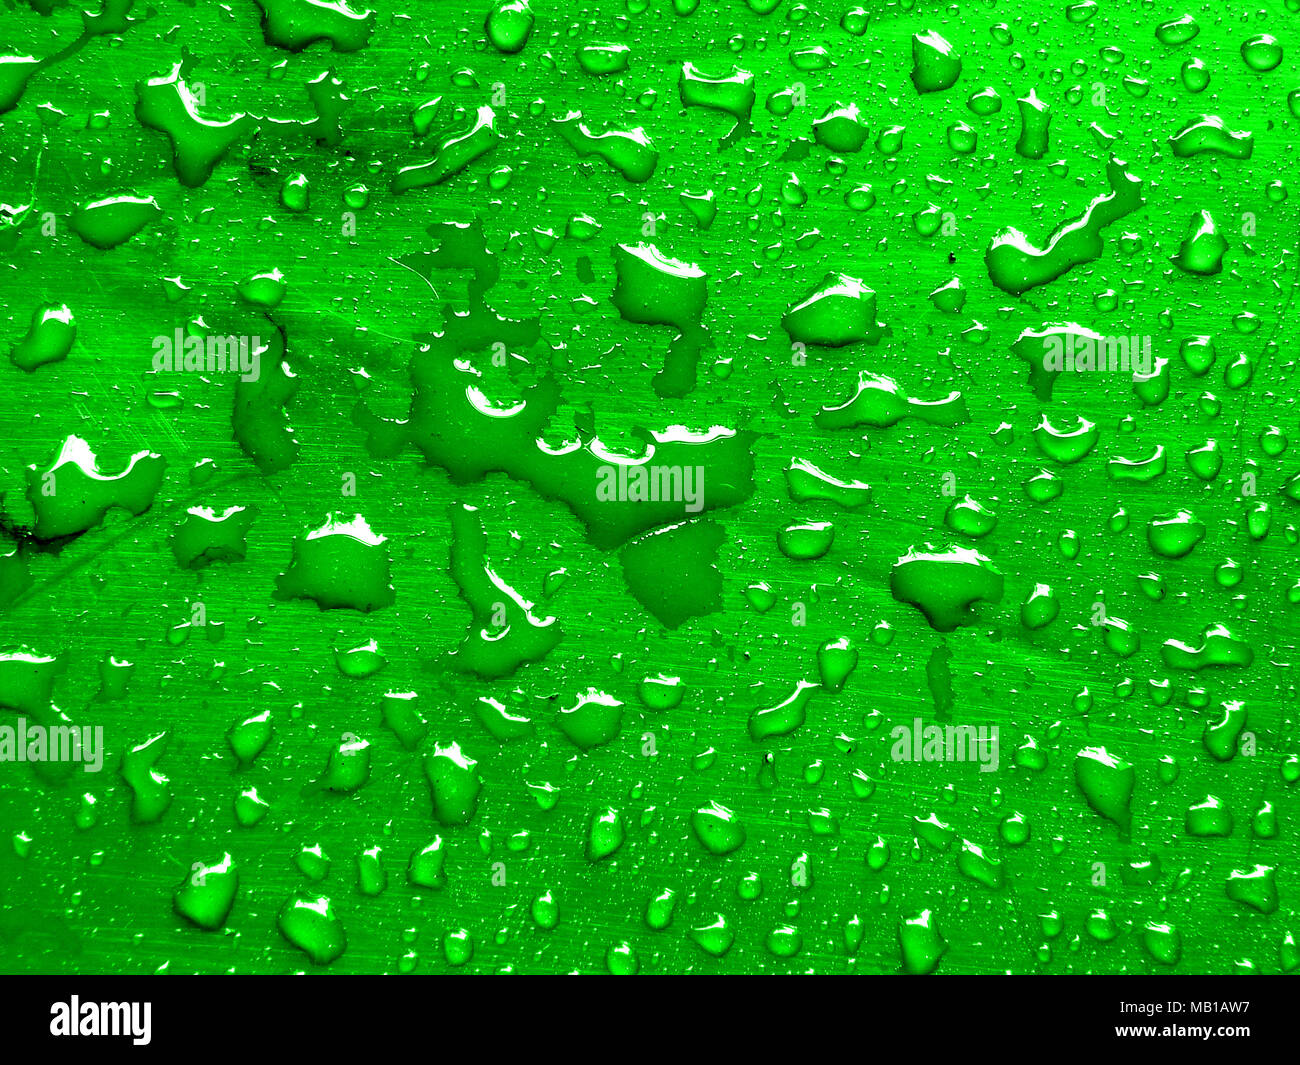 water drops on lime green metallic surface Stock Photo